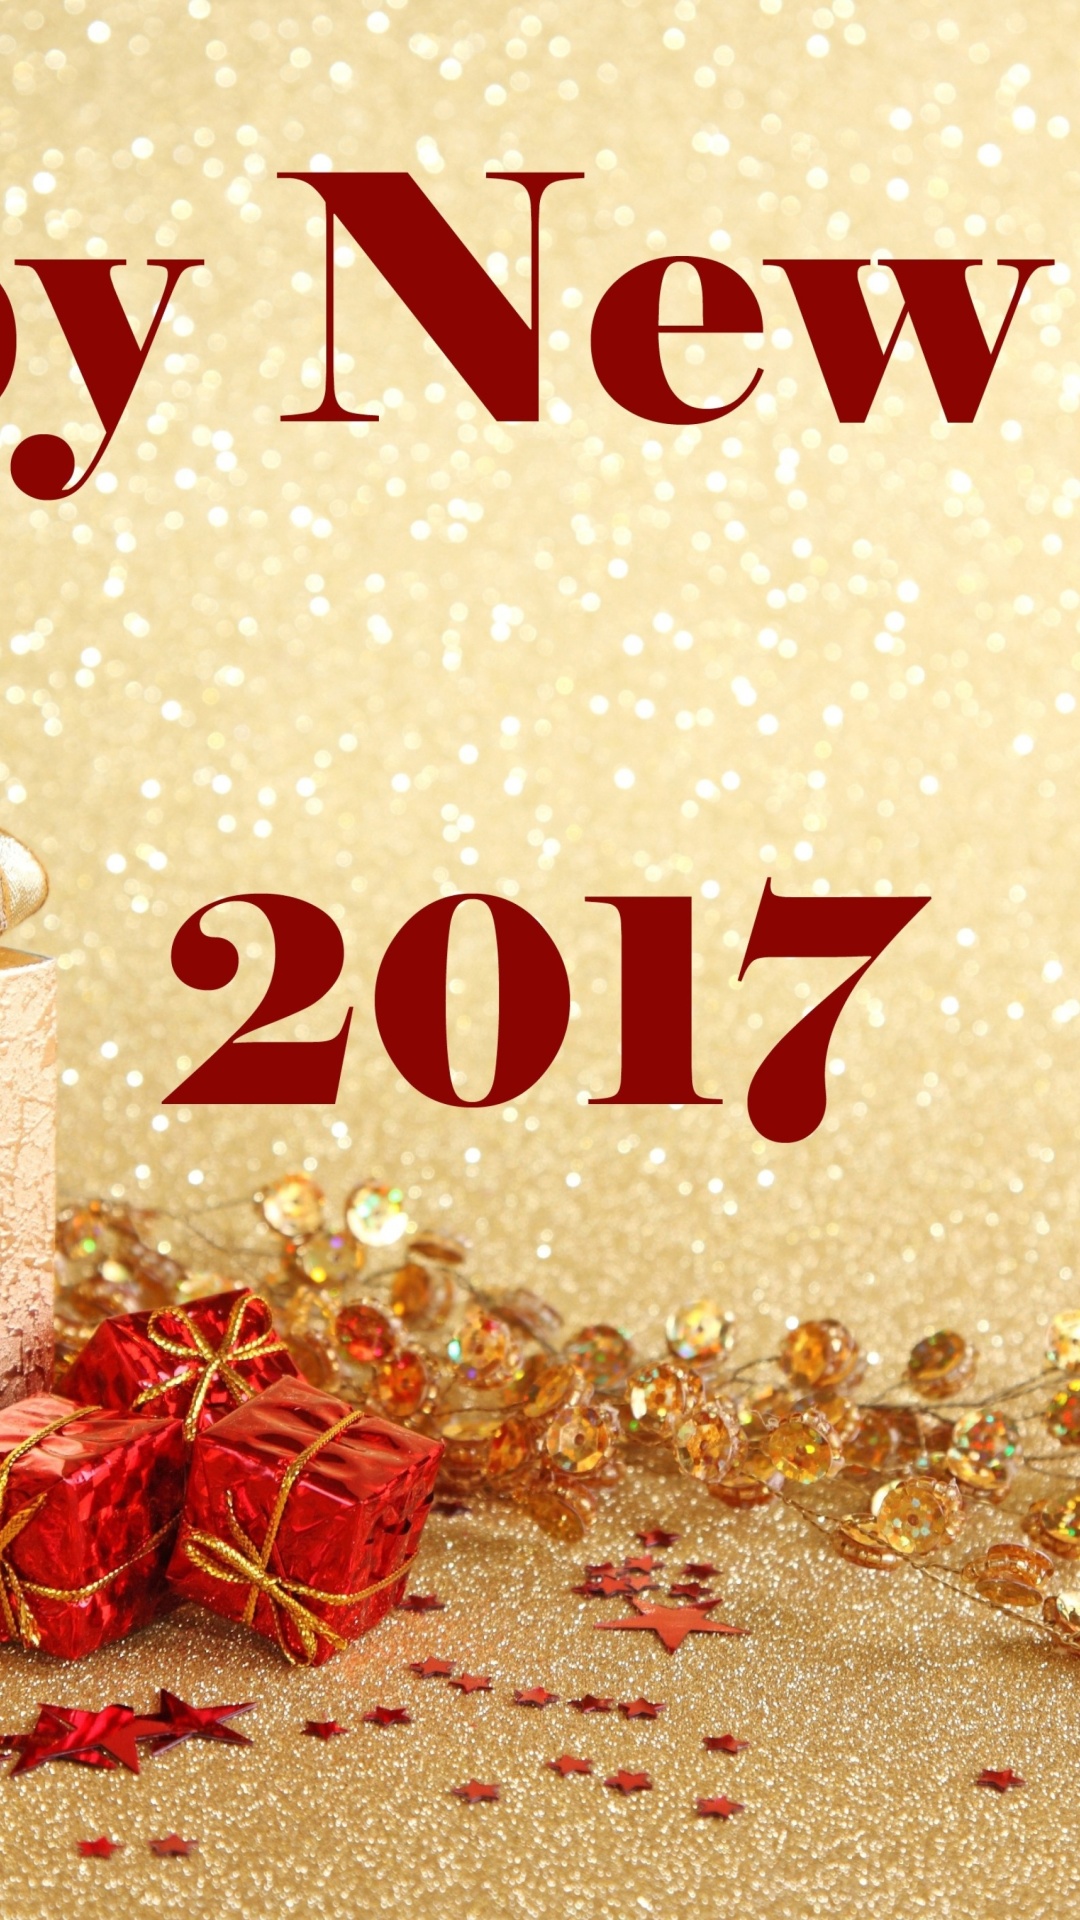 Das Happy New Year 2017 with Gifts Wallpaper 1080x1920